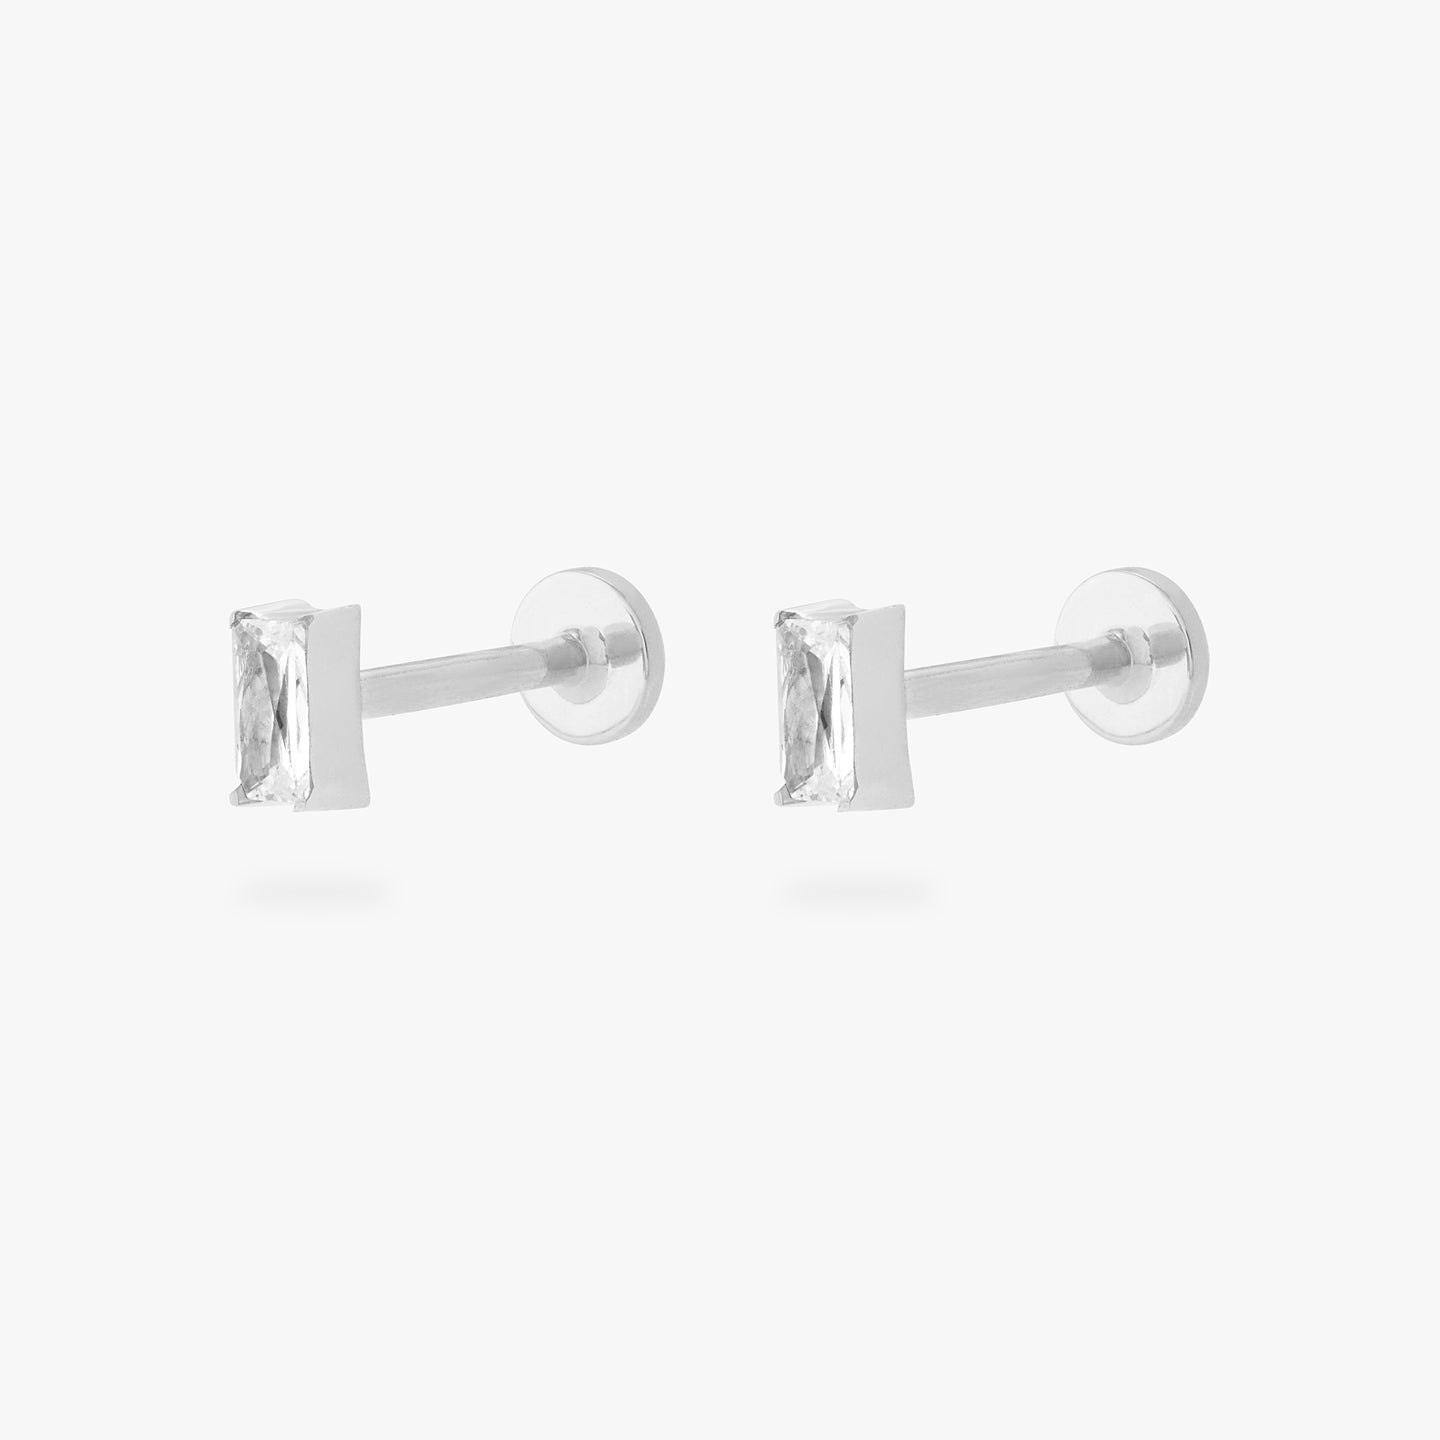 This is an image of a pair of silver/clear baguette shaped CZ flatback studs, with silver labrets with circle discs with 